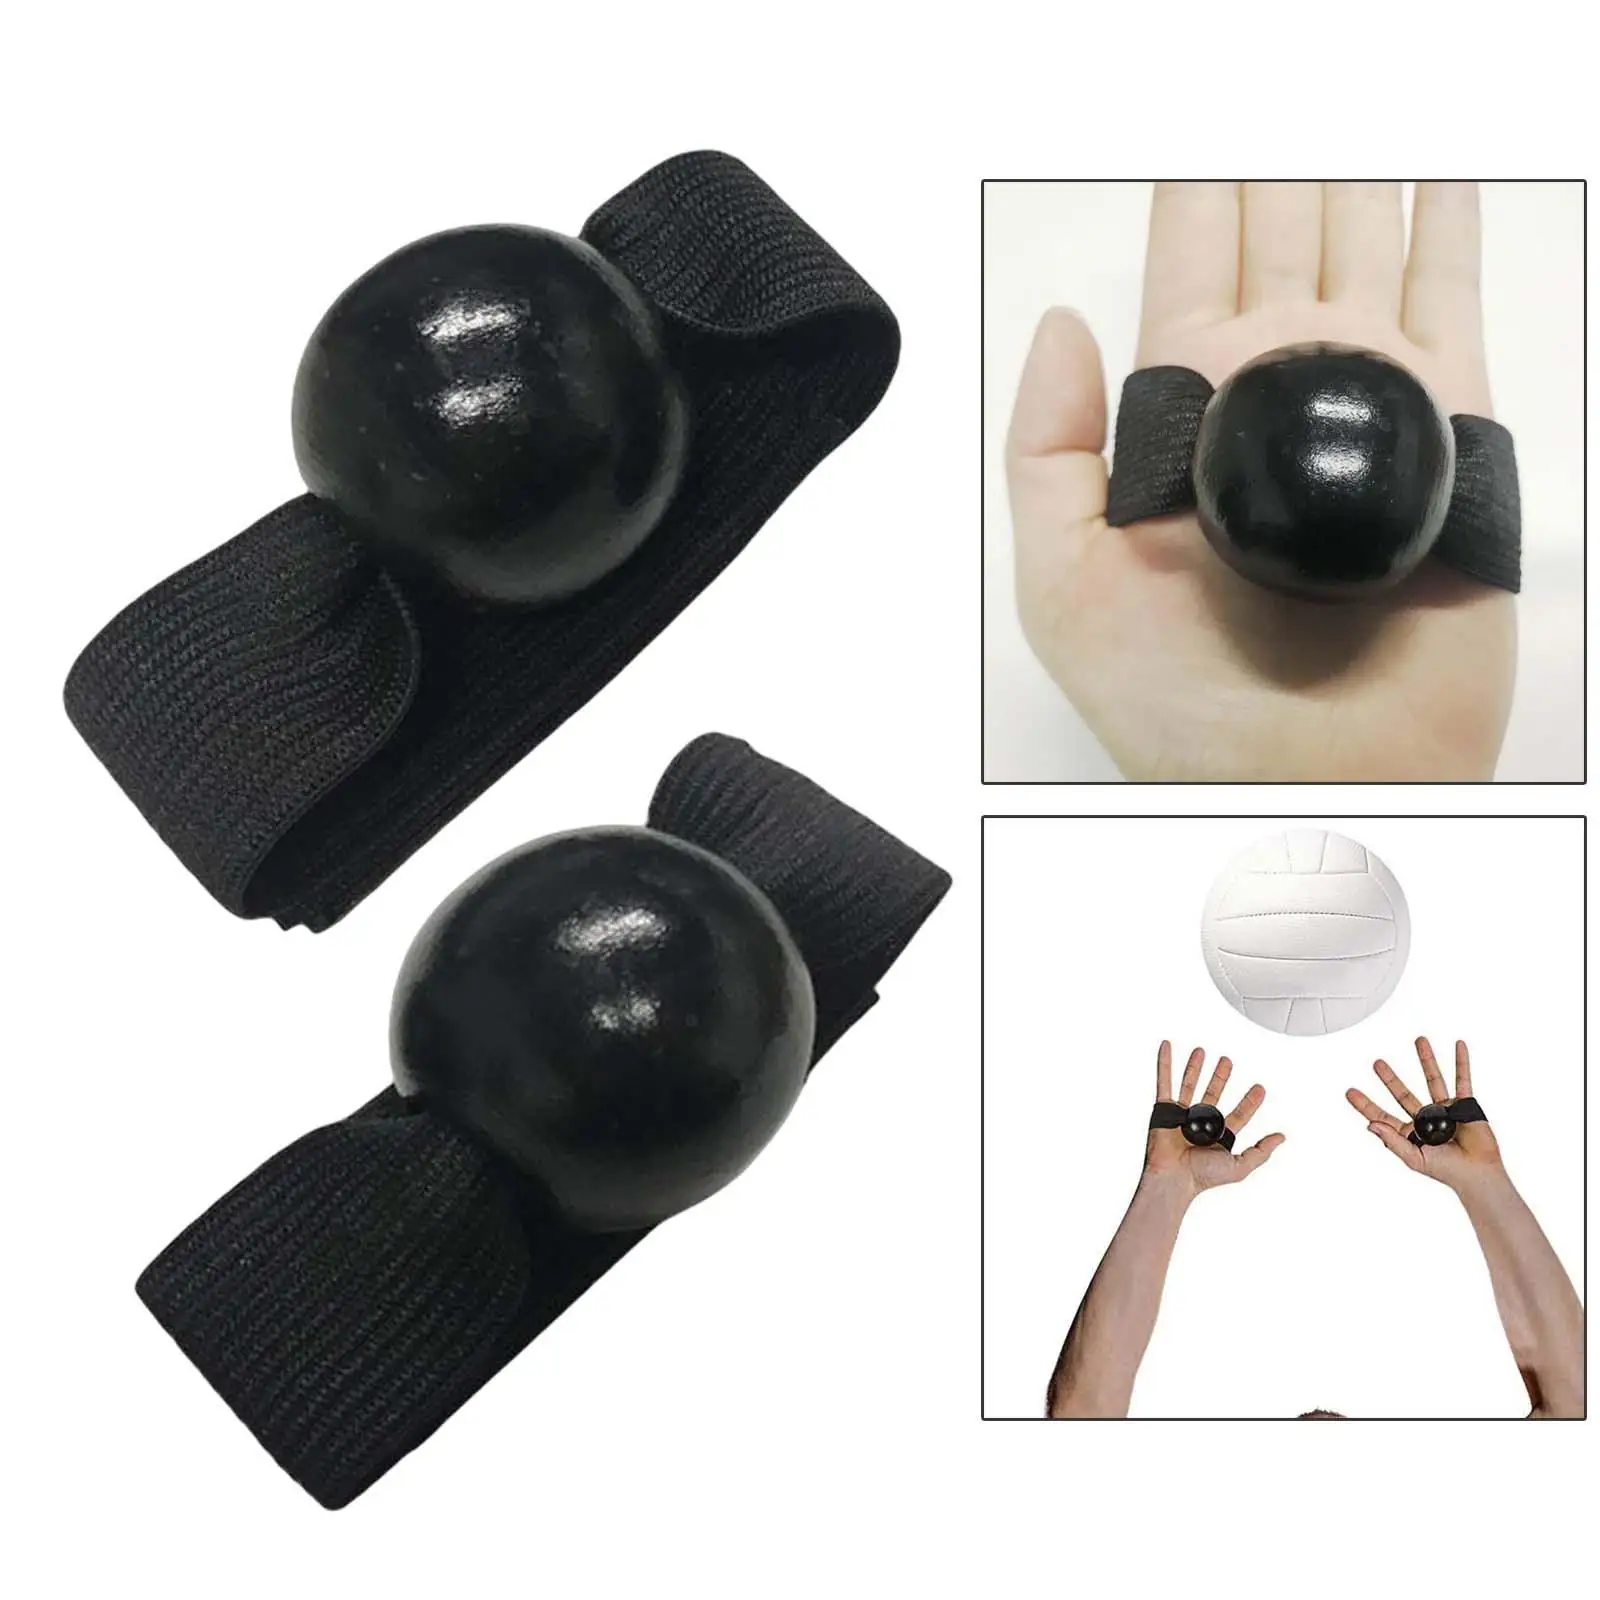 2 Pieces Volleyball Setting Drills Training Aid Assistant Setter Training Adjustable for Beginner Volleyball Equipment